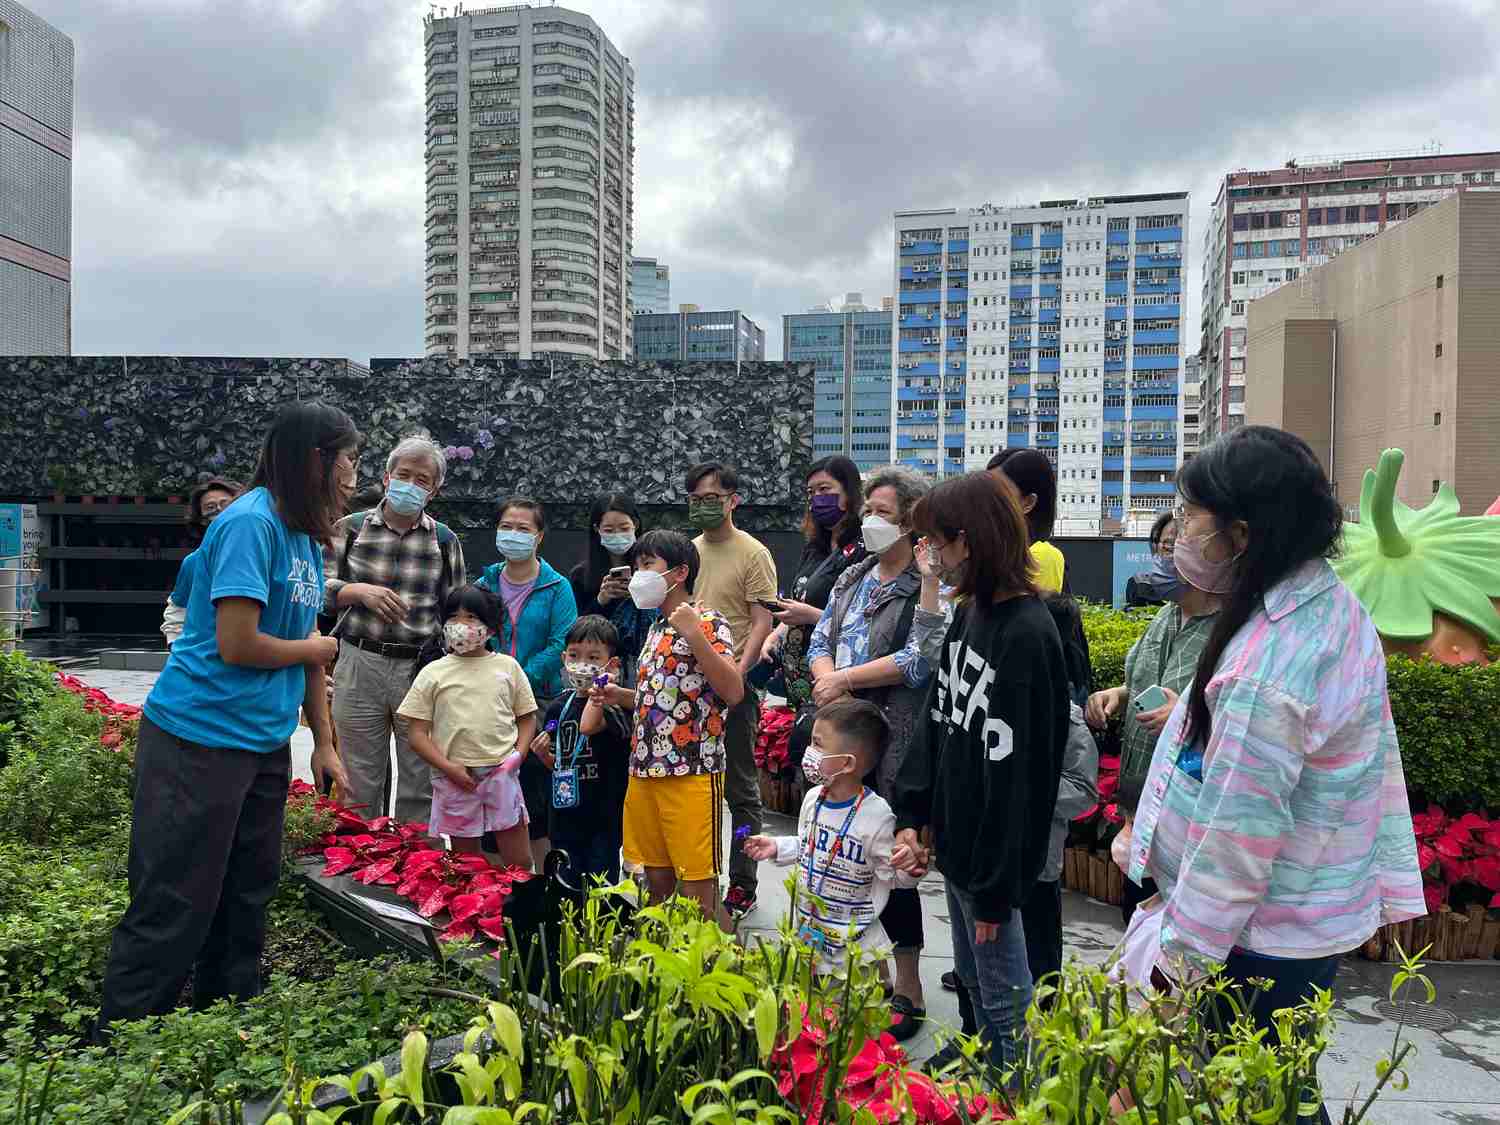 Earth Day Growing Weekend: Join us on April 22! 週六地球日︰城巿耕作工作坊